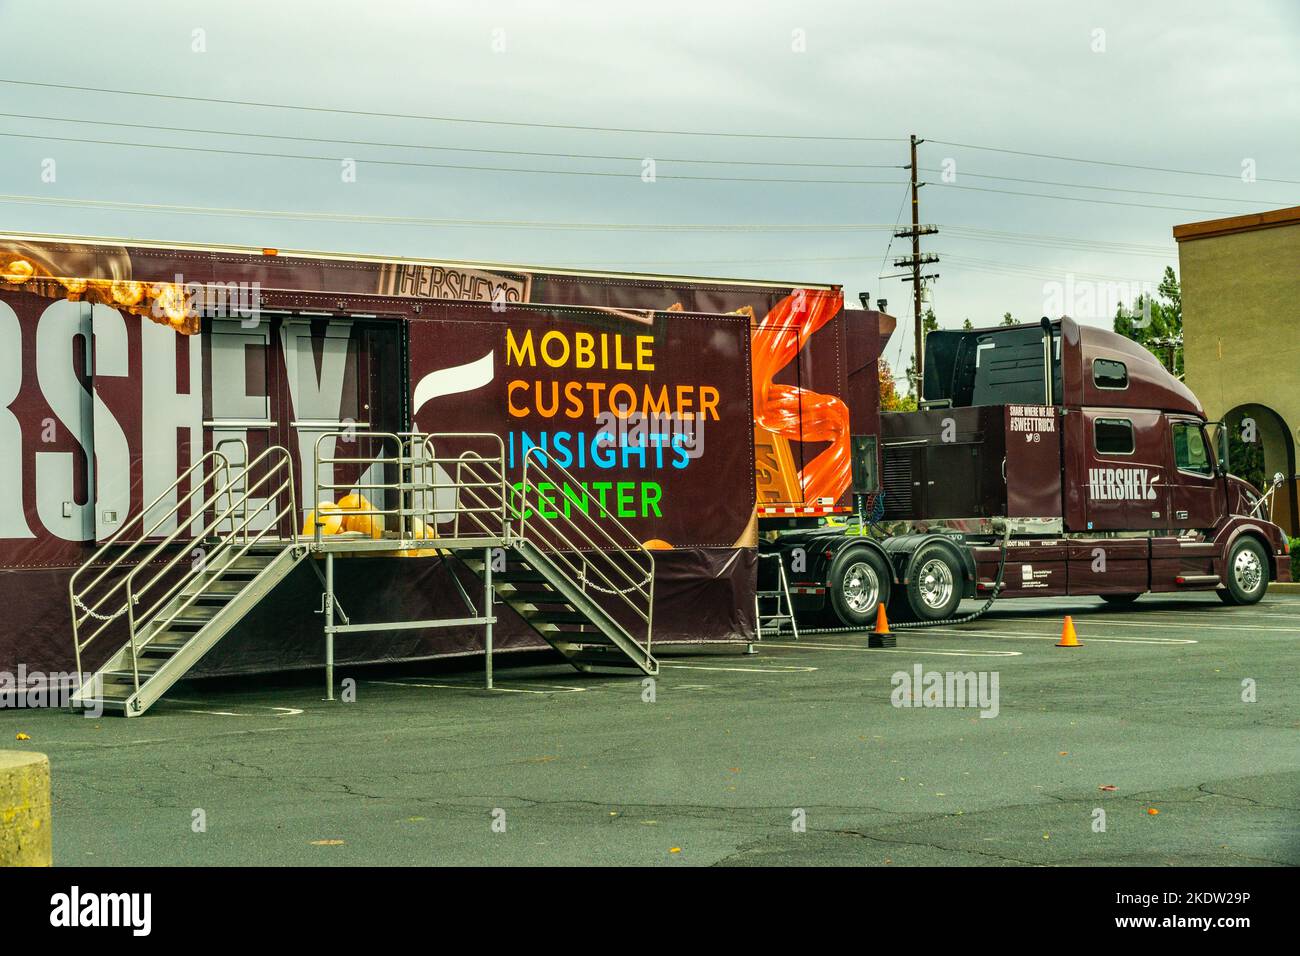 A Hershey's Chocolate mobile Customer Insight Center parked at a shopping center in Modesto California USA Stock Photo